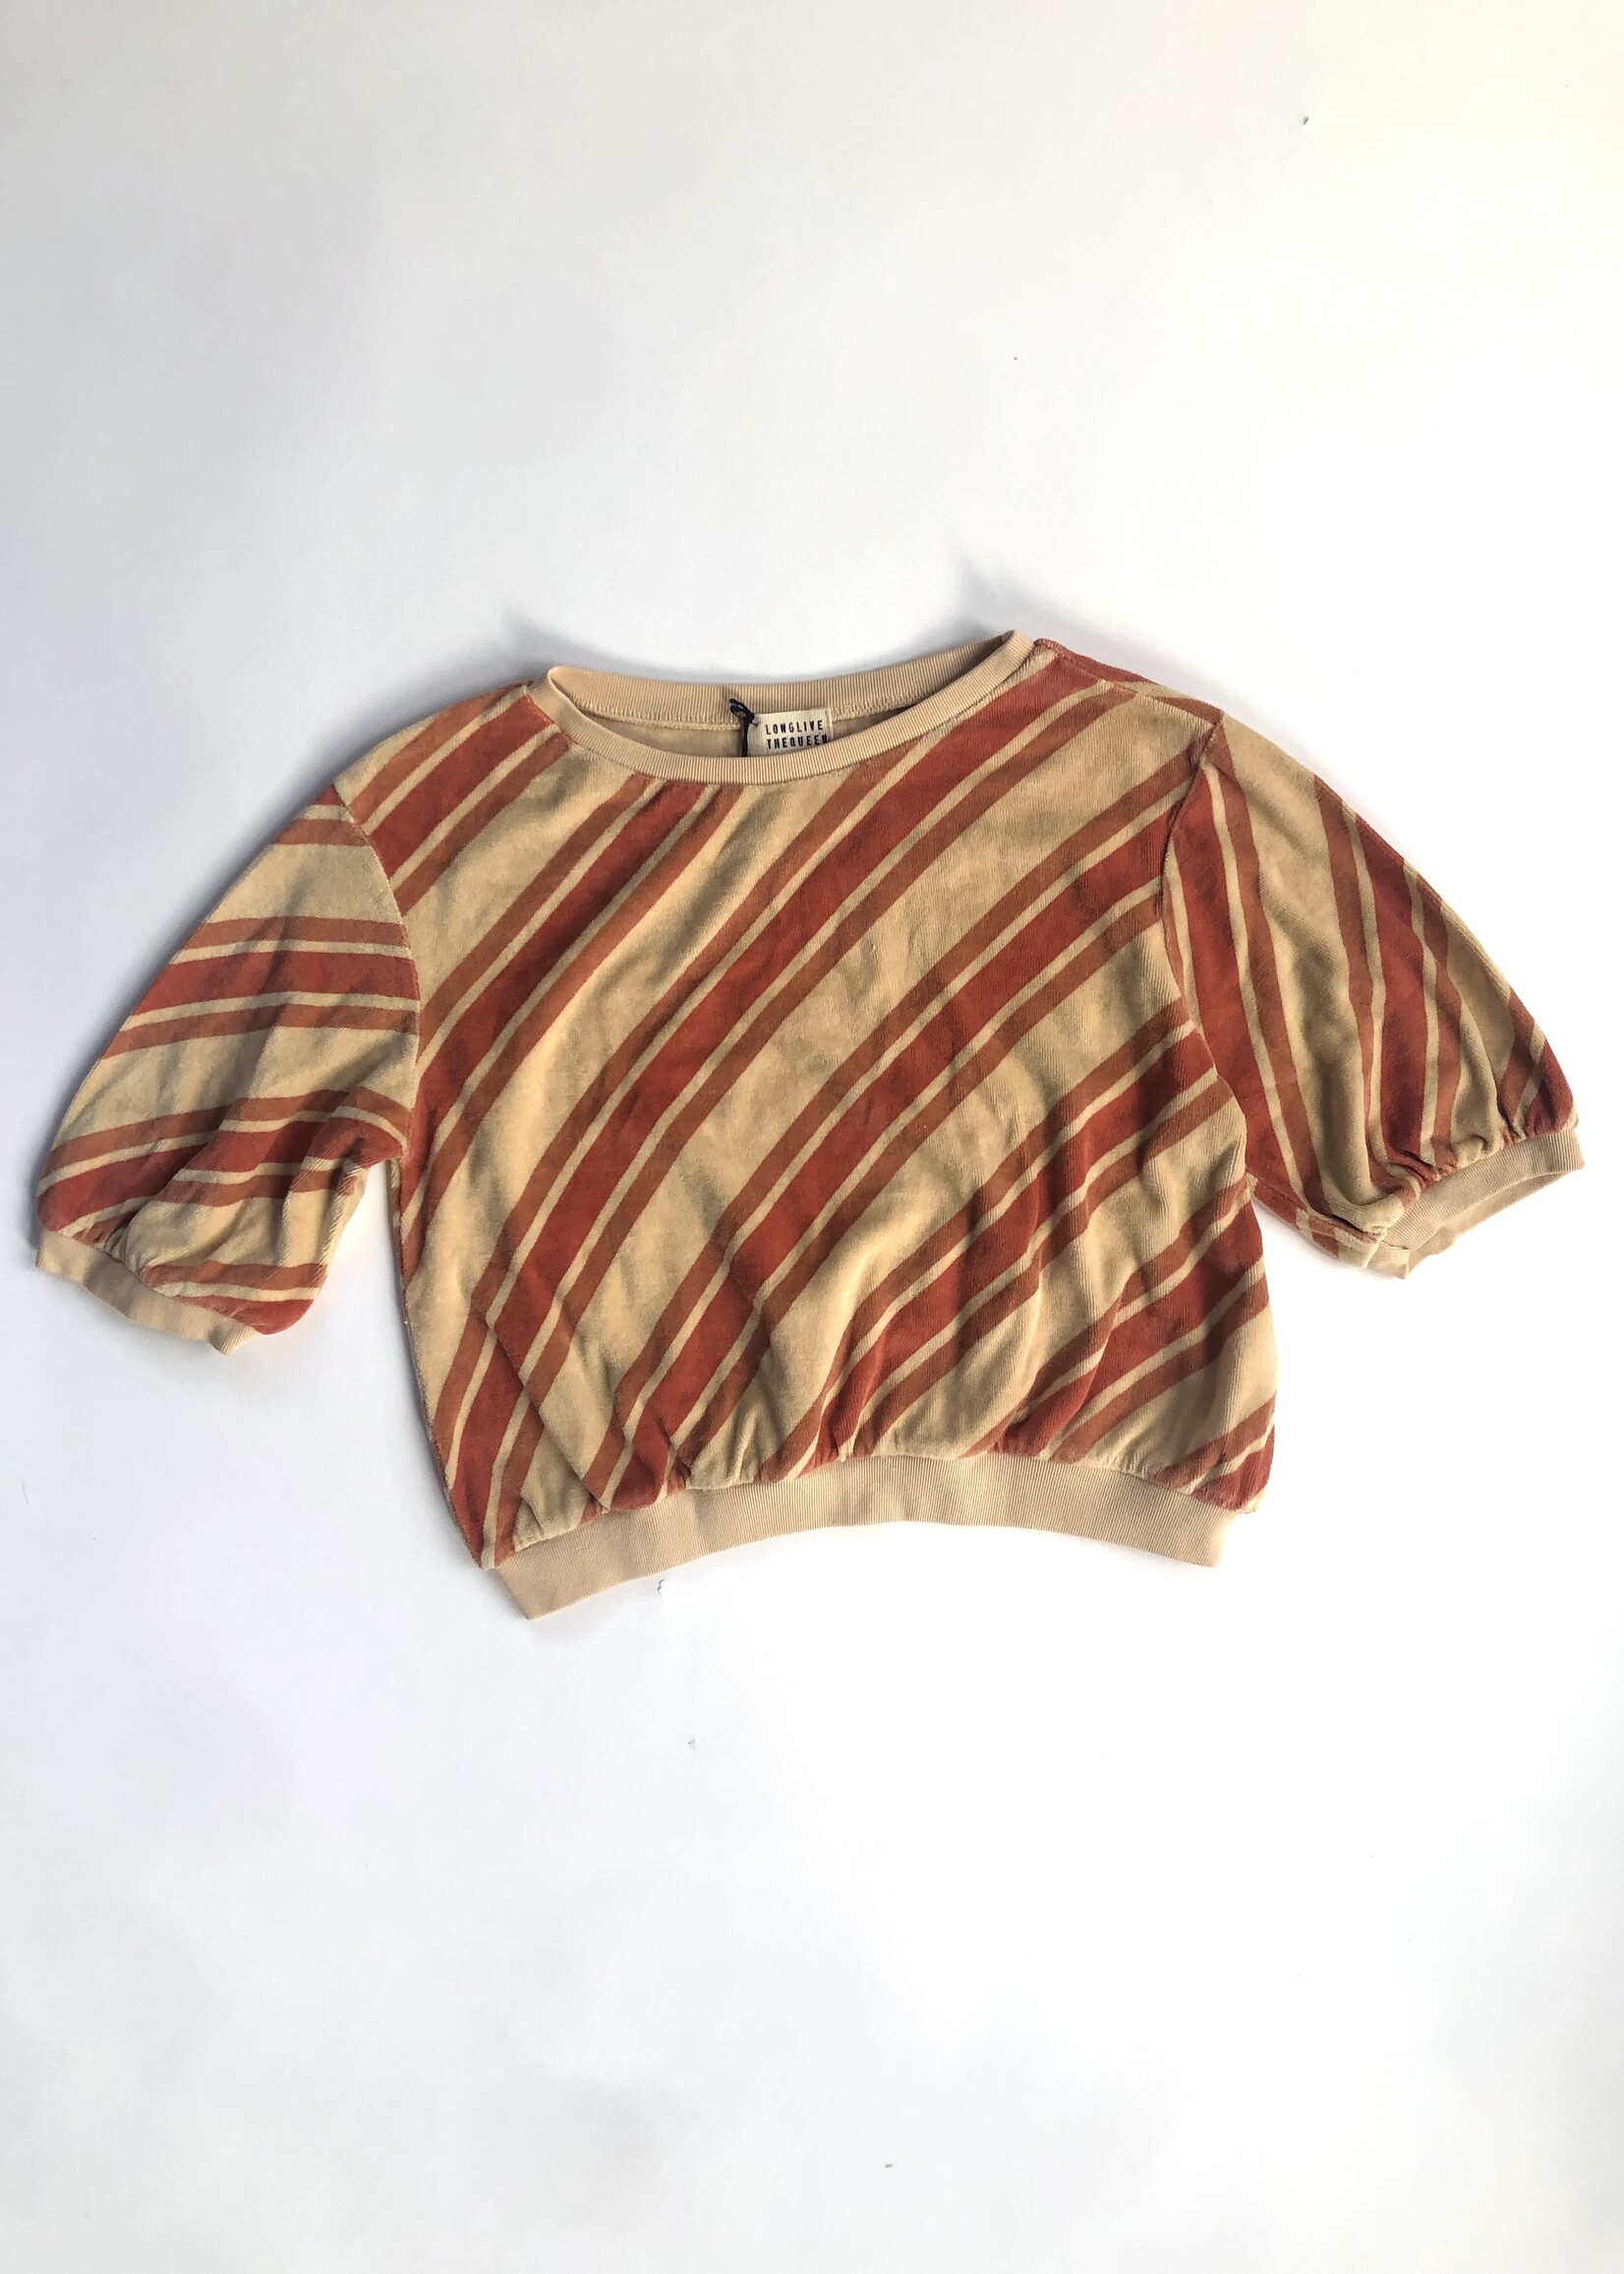 Long Live The Queen Burned orange striped sweater shirt 8-10y